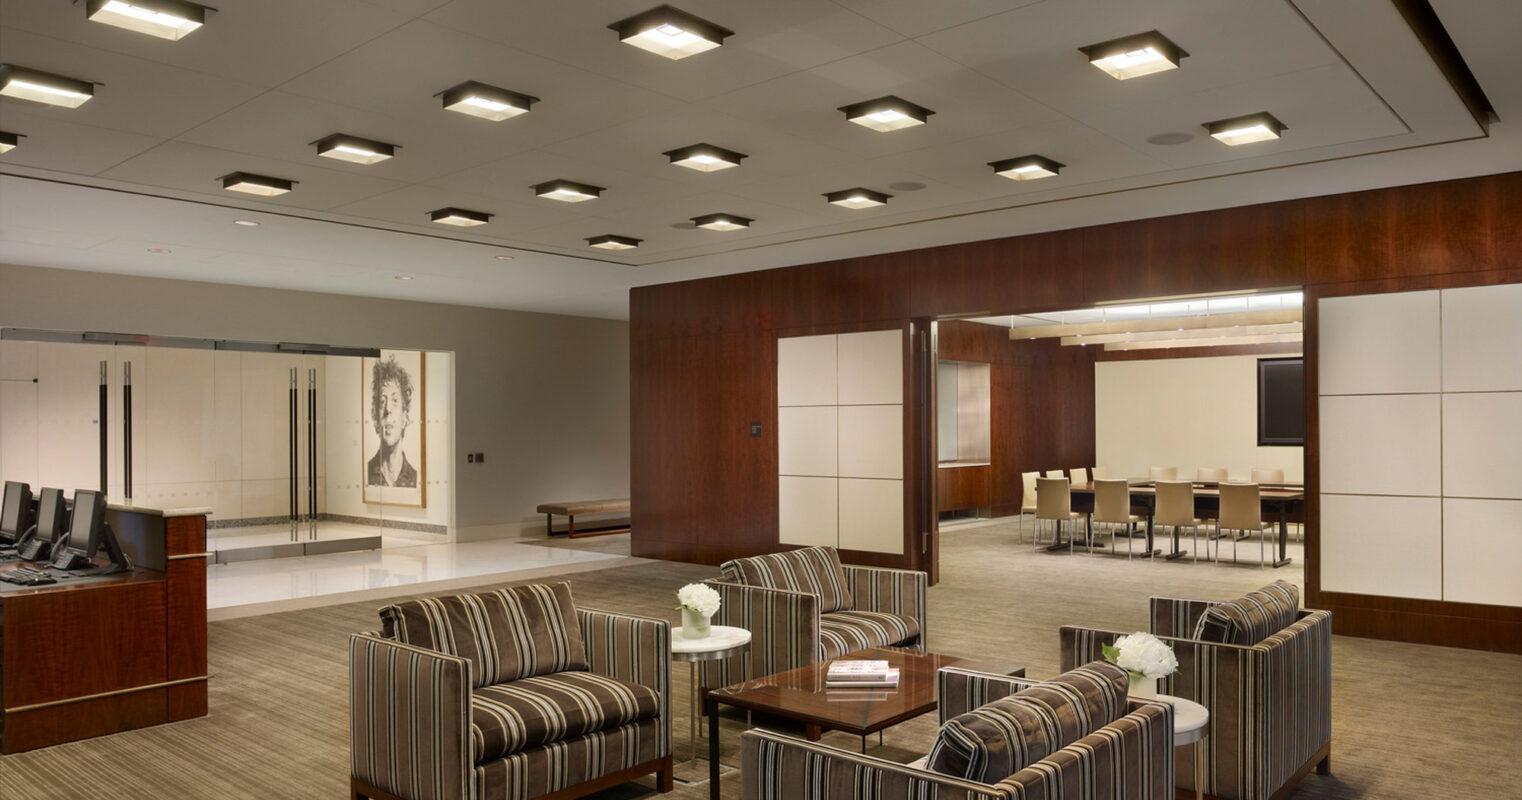 Modern corporate lobby featuring striped upholstered seating, recessed ceiling lights, dark wood paneling, and neutral-toned carpet. Glass partitions provide a glimpse into the adjacent conference room, creating a sense of openness while preserving privacy.